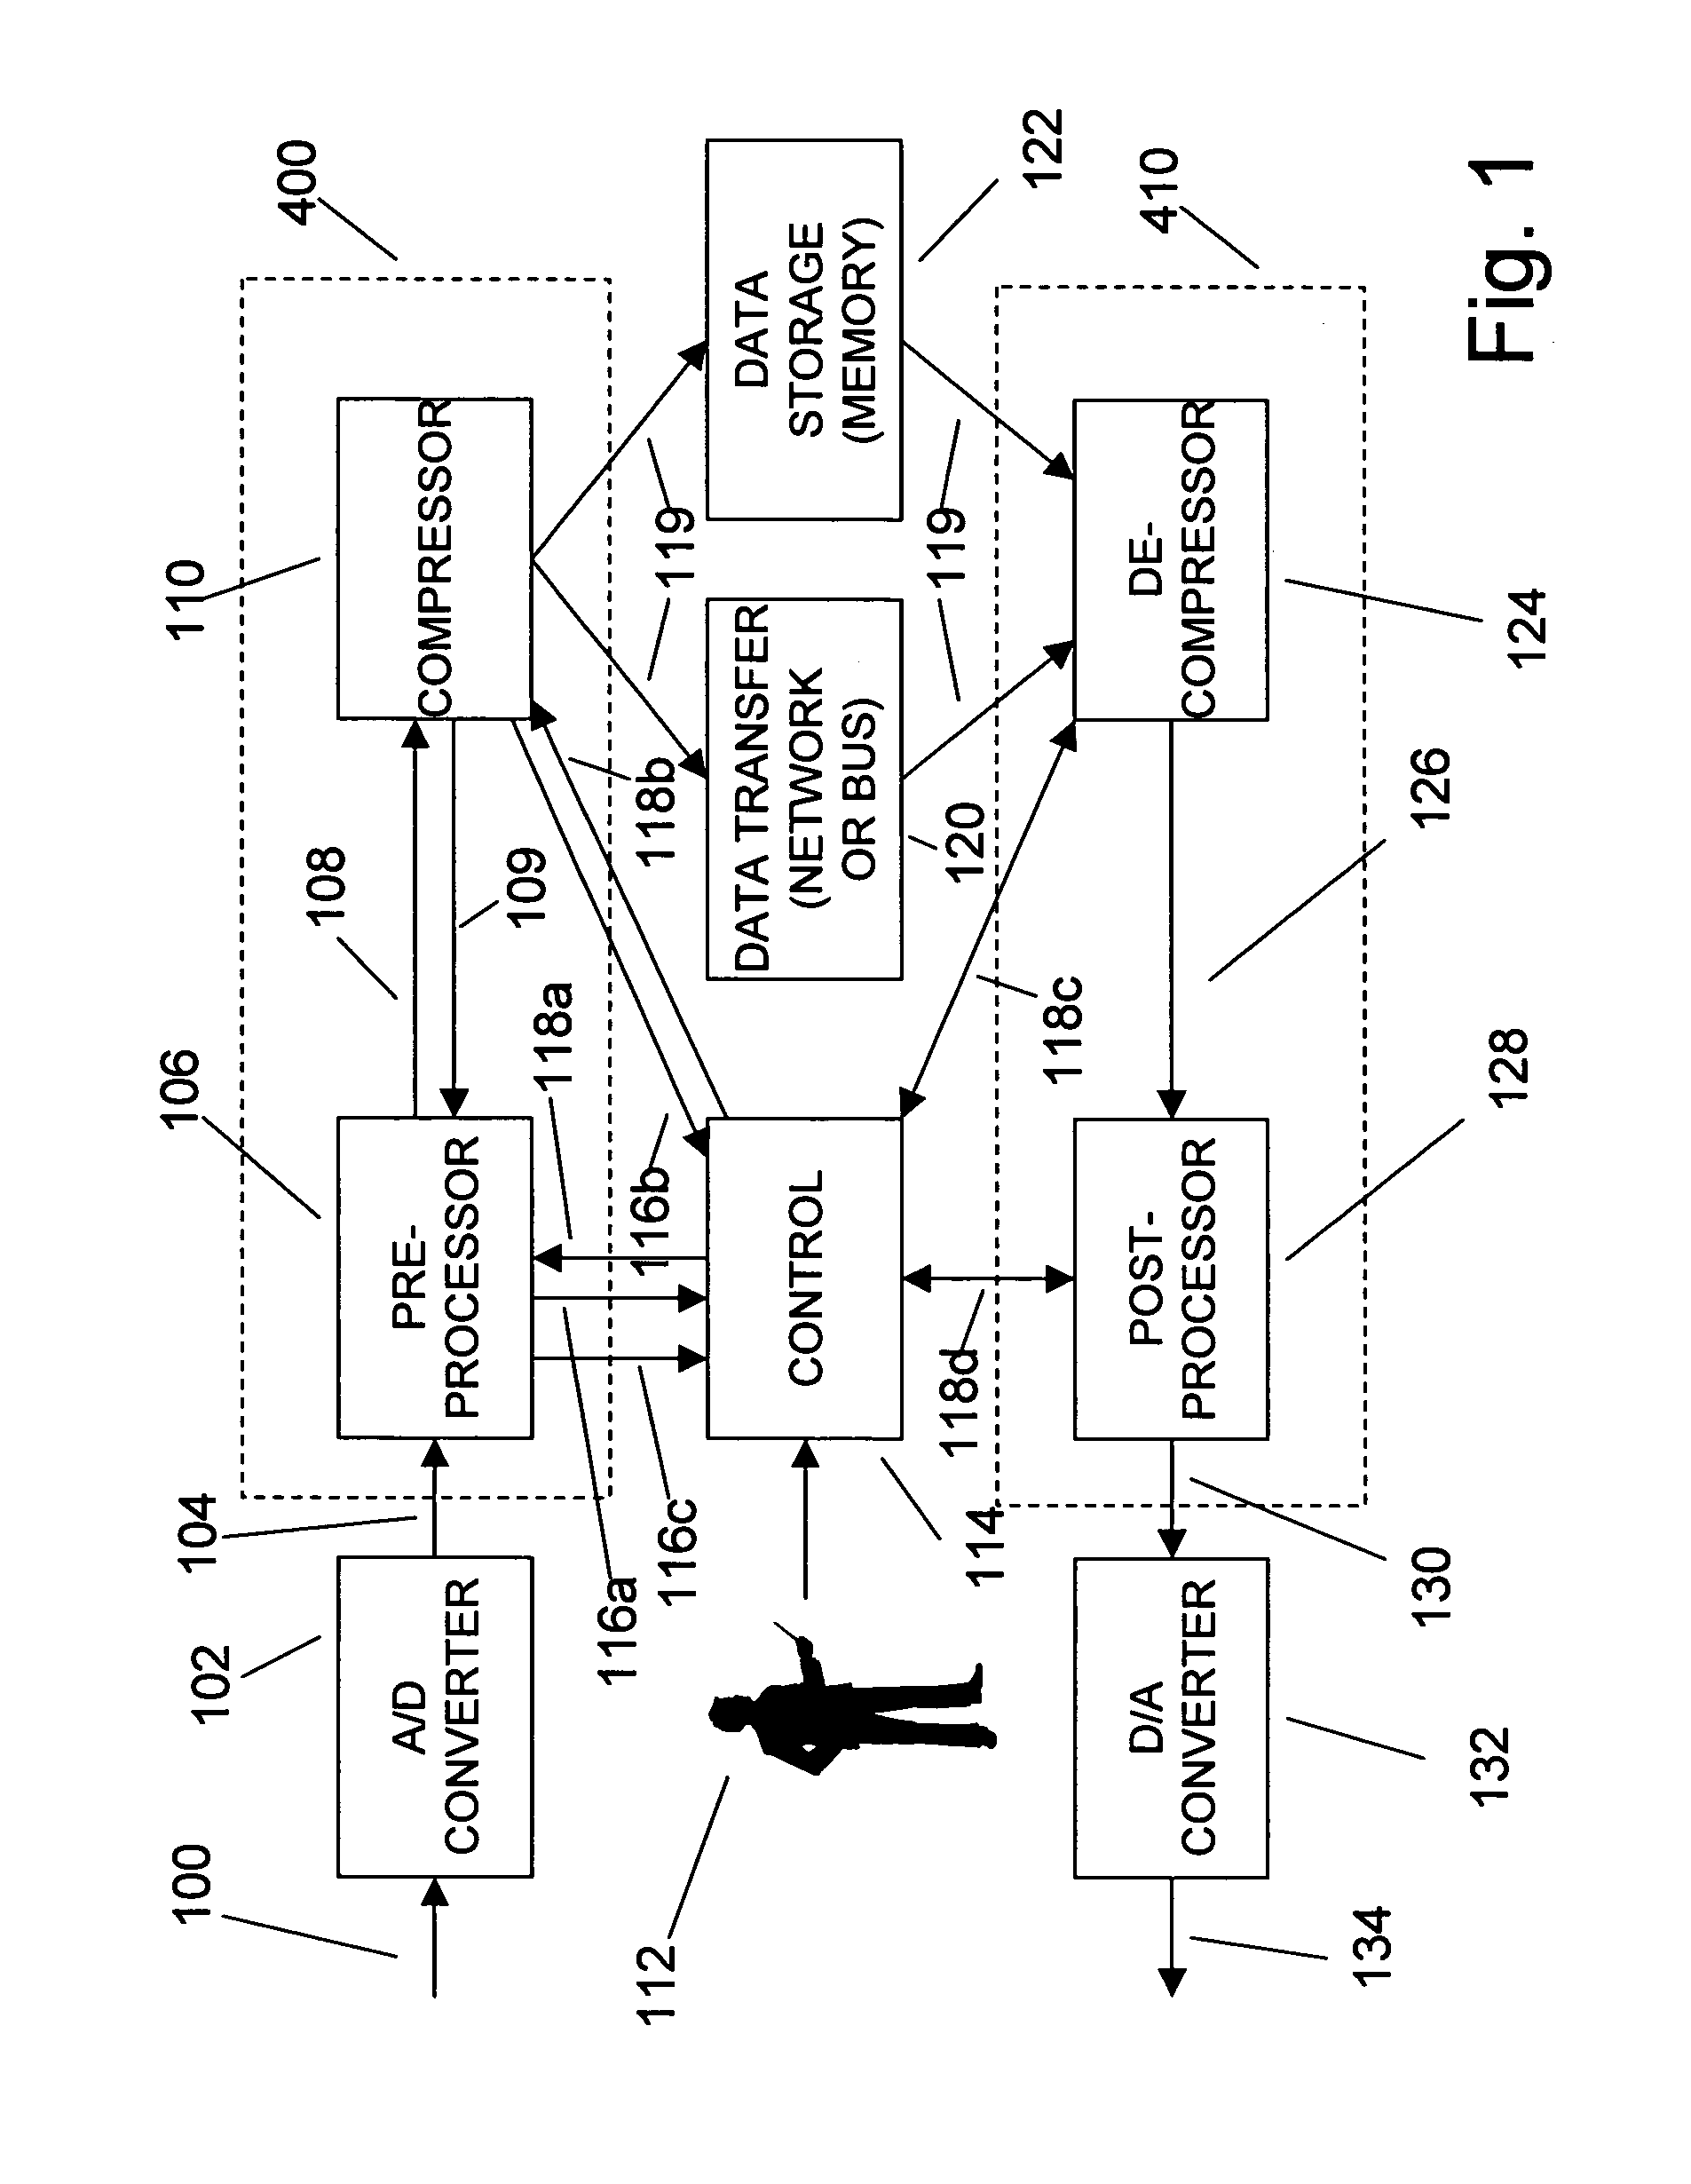 Adaptive compression and decompression of bandlimited signals